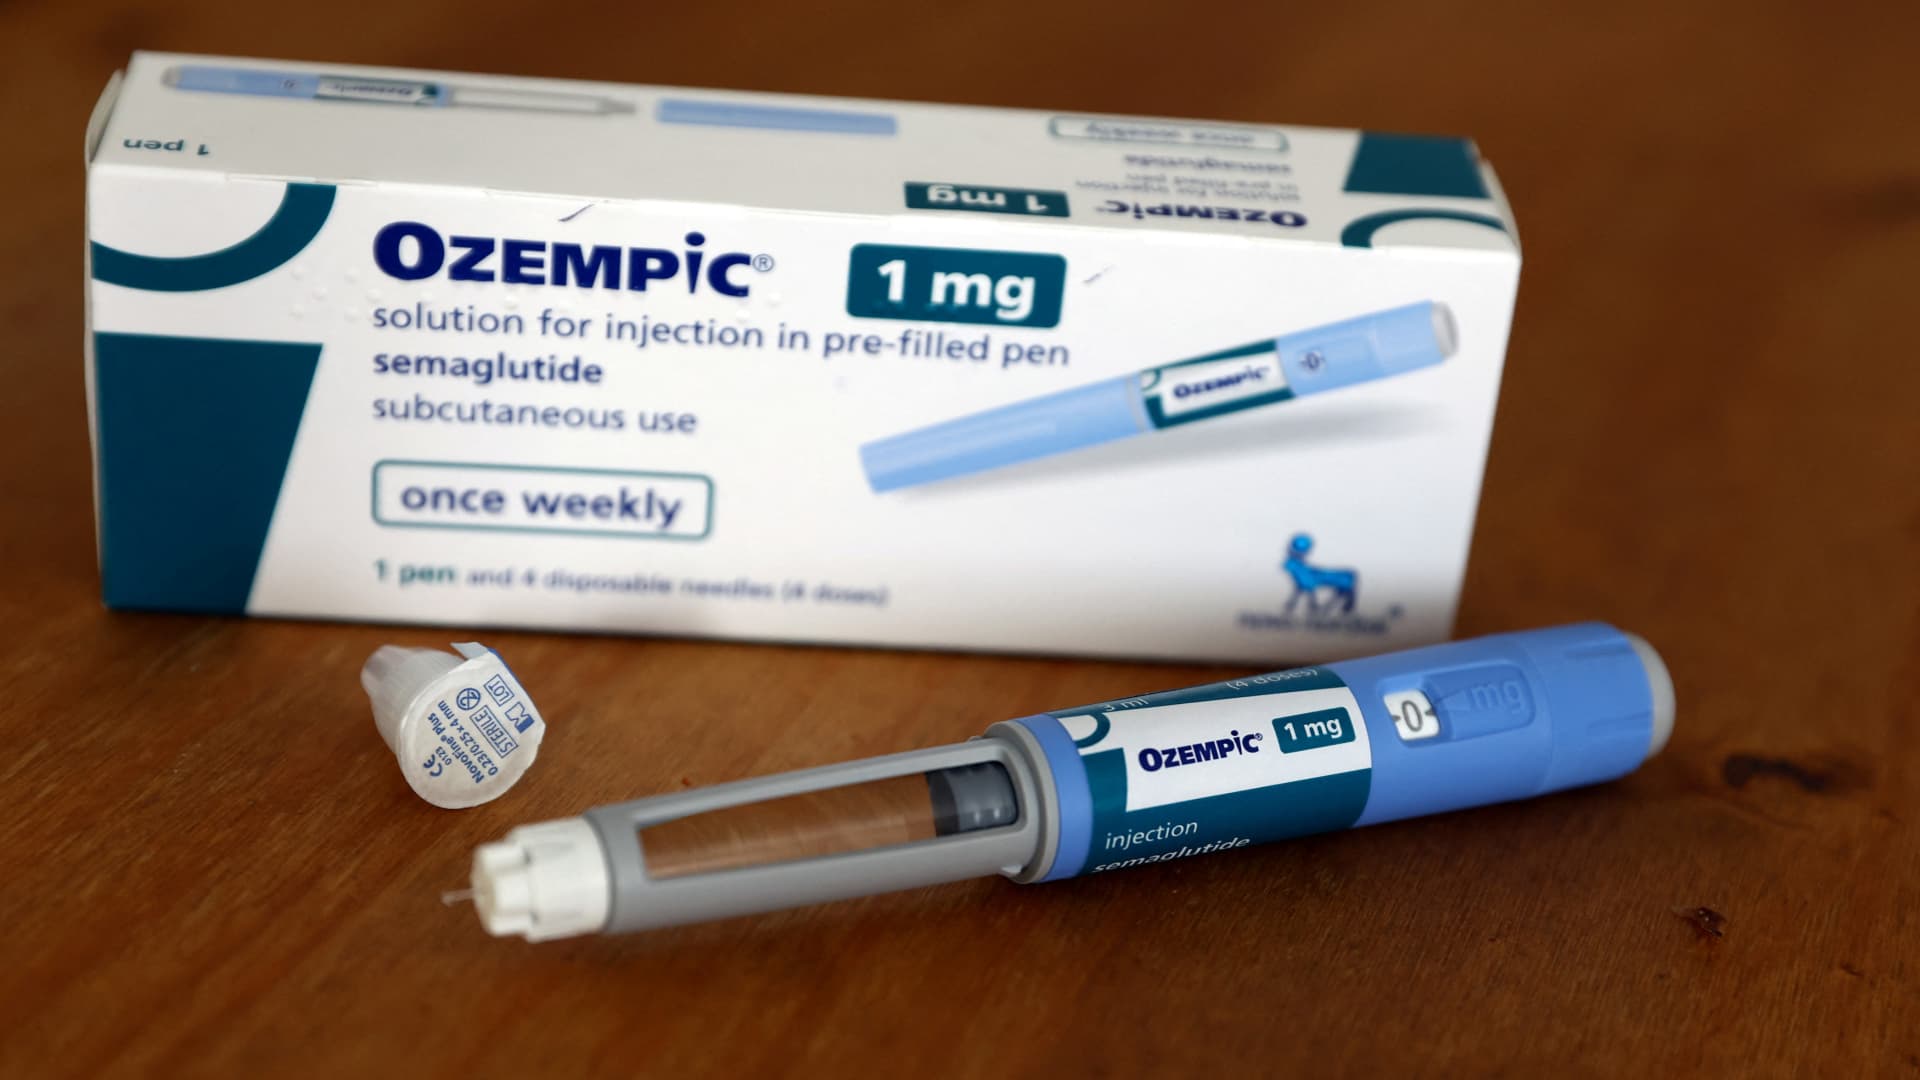 Novo Nordisk’s Ozempic can be made for less than $5 a month: study